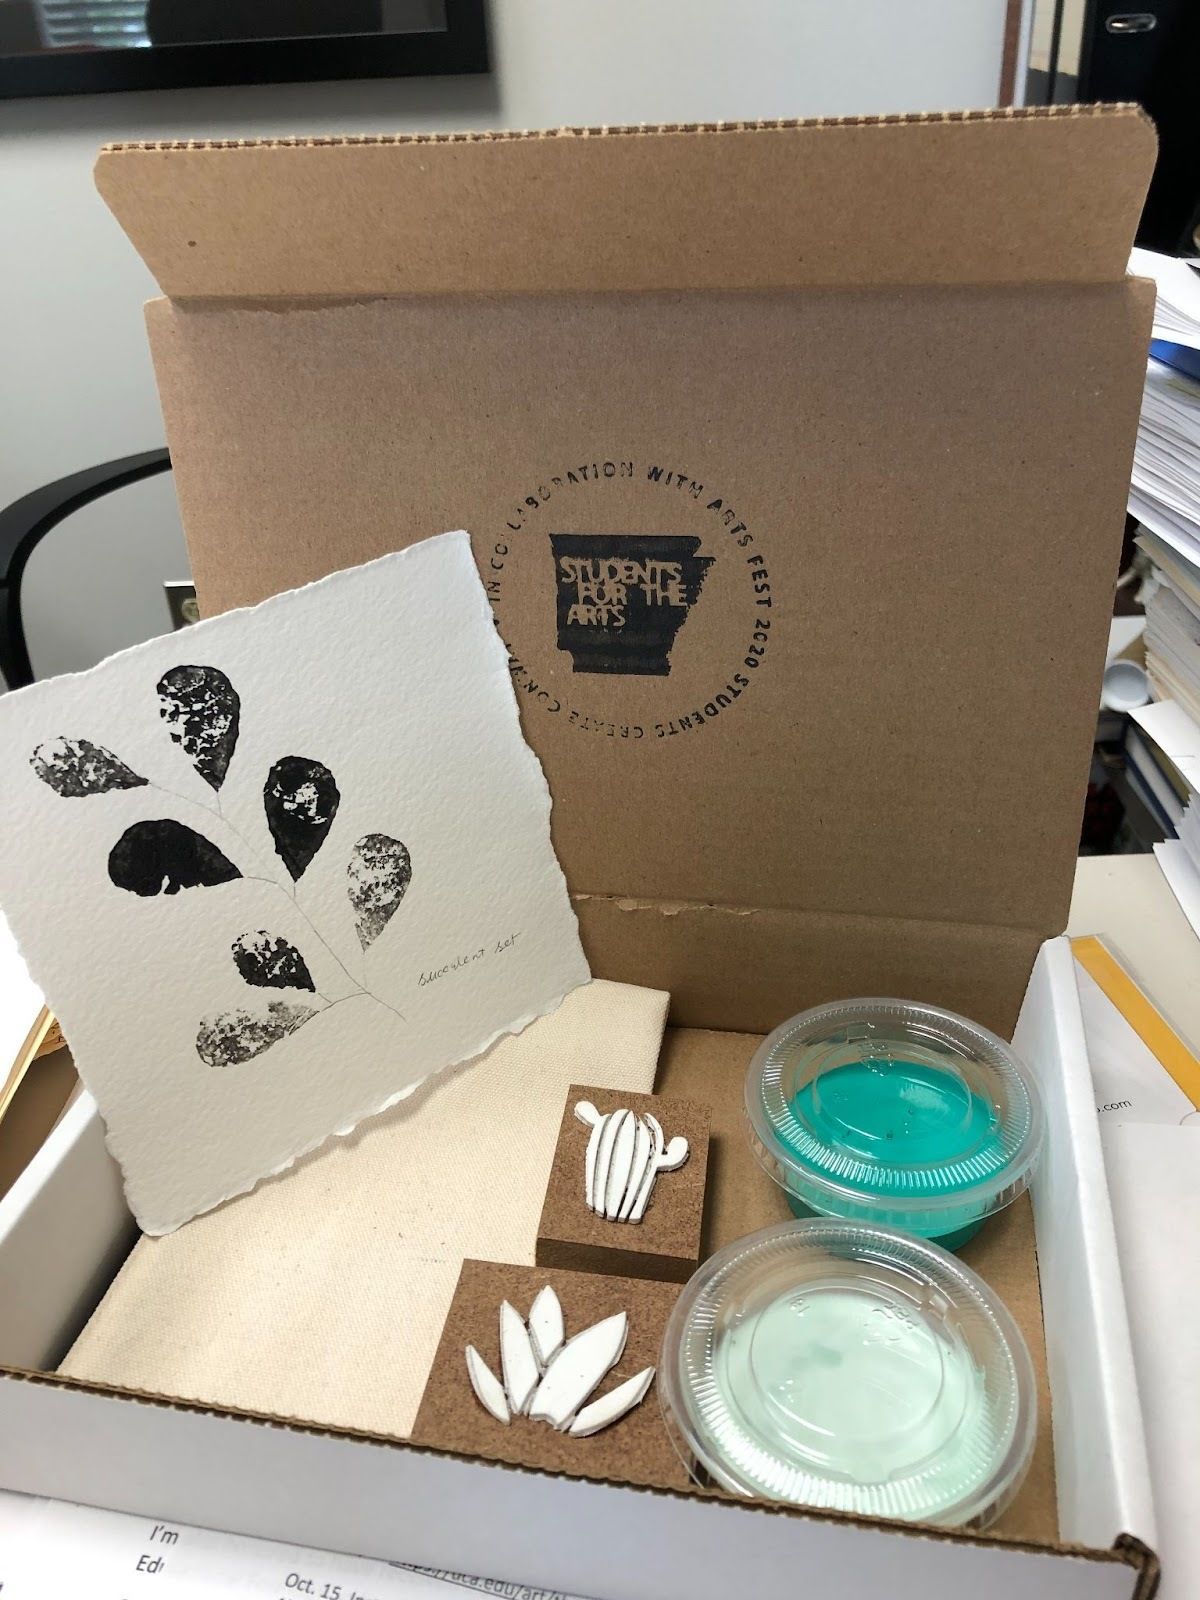 A Students for the Arts branded box contains supplies for a self-care arts project using paint and stamps.